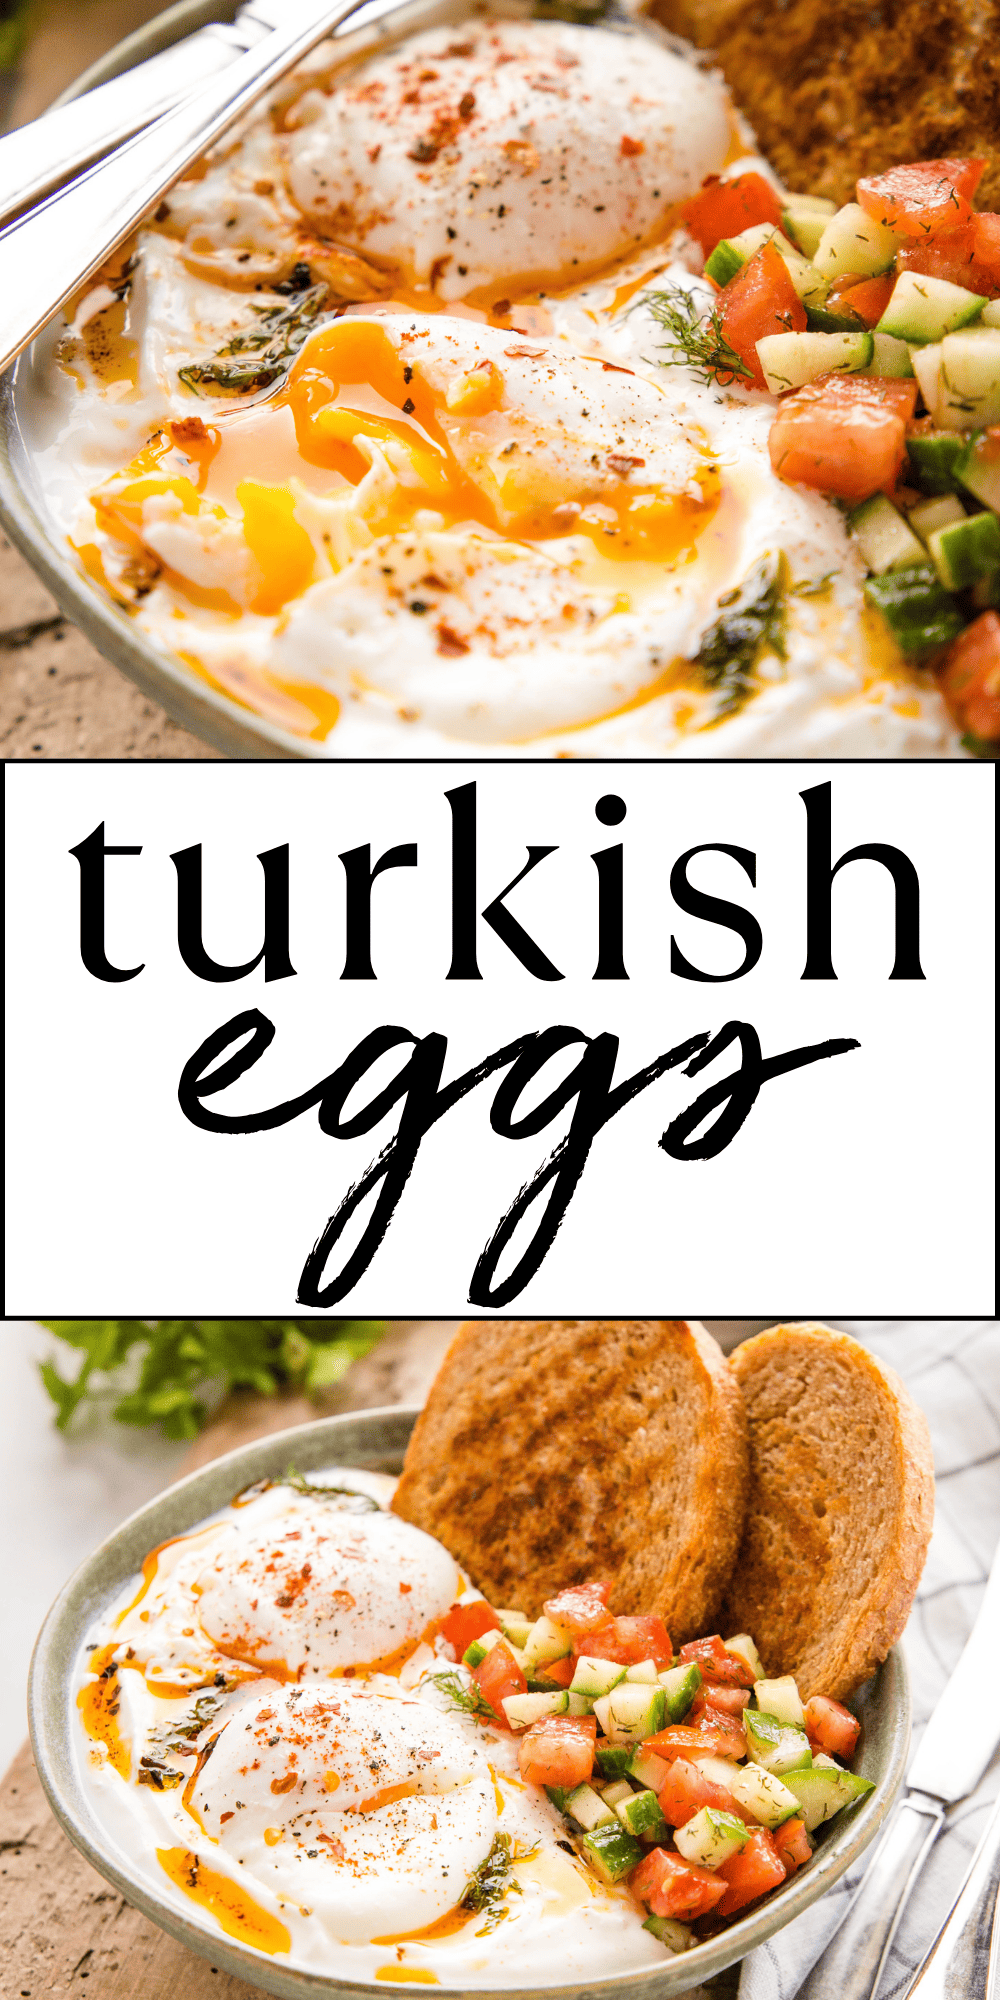 This Turkish Eggs recipe (Çilbir) is a delicious & healthy breakfast made with poached eggs, garlic yogurt sauce, chili oil, and fresh veggies. Learn how to make poached eggs the EASY way to enjoy these Turkish Eggs with yogurt! Recipe from thebusybaker.ca! #turkisheggs #turkisheggsrecipe #turkisheggswithyogurt #healthybreakfast #ketobreakfast #health #lowcarb #mediterraneandiet via @busybakerblog